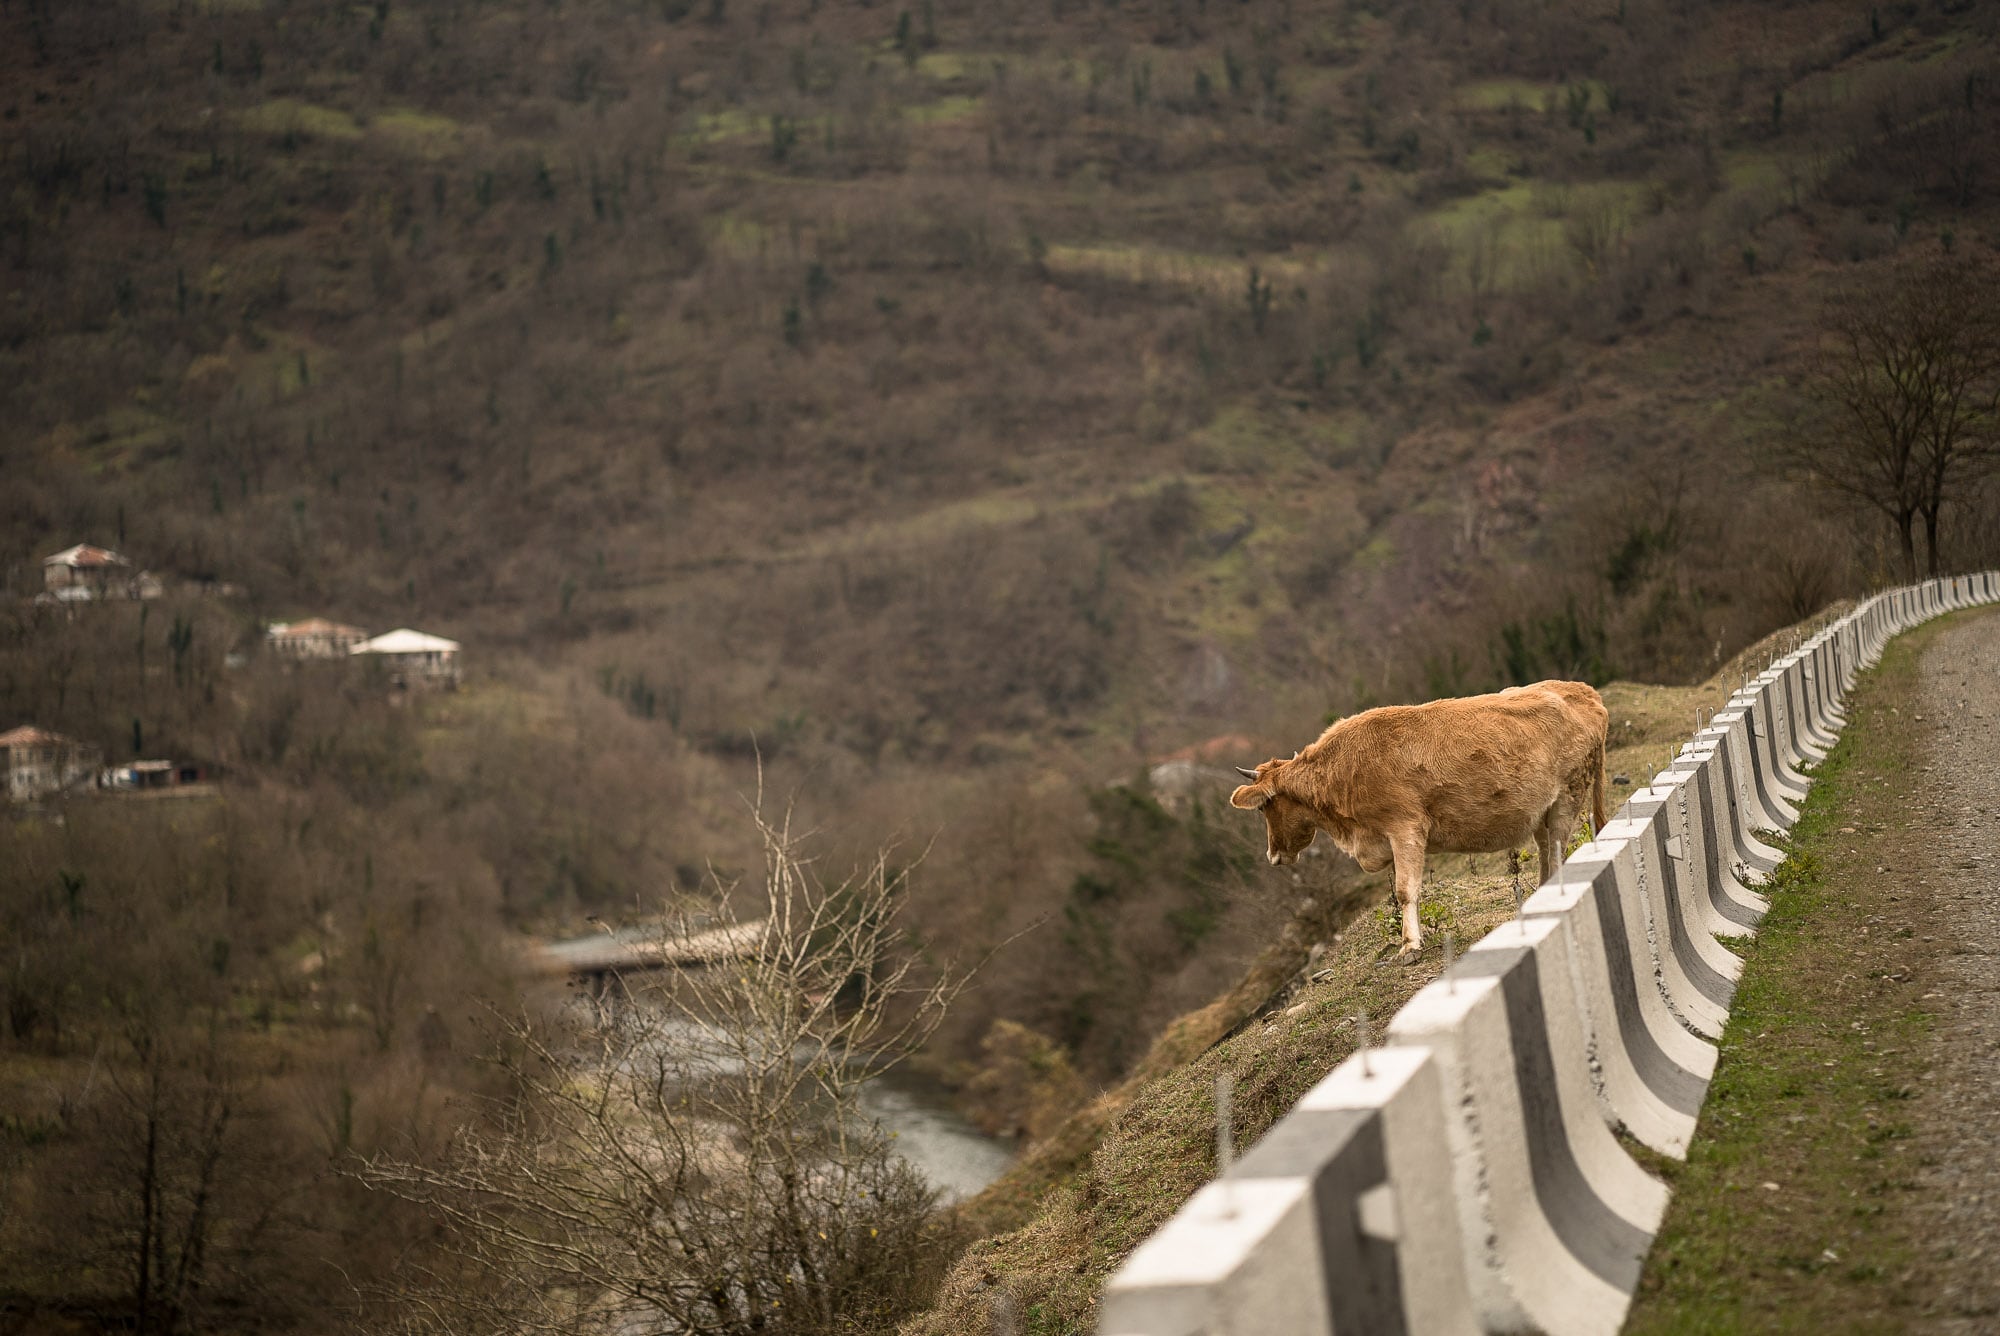 cow wondering how to get down from there